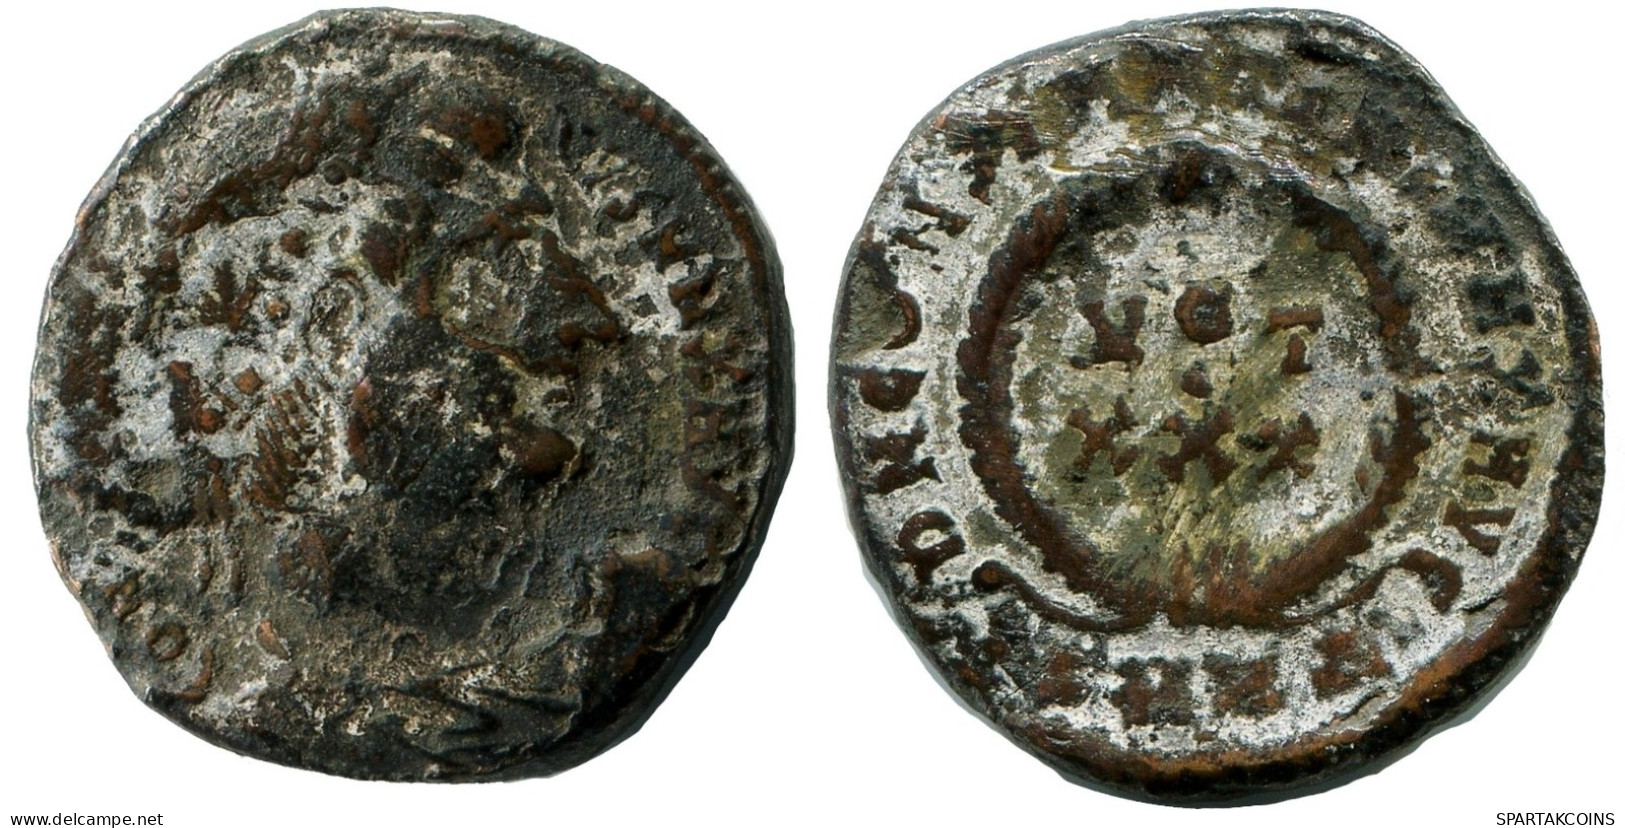 CONSTANTINE I MINTED IN HERACLEA FOUND IN IHNASYAH HOARD EGYPT #ANC11210.14.F.A - The Christian Empire (307 AD To 363 AD)